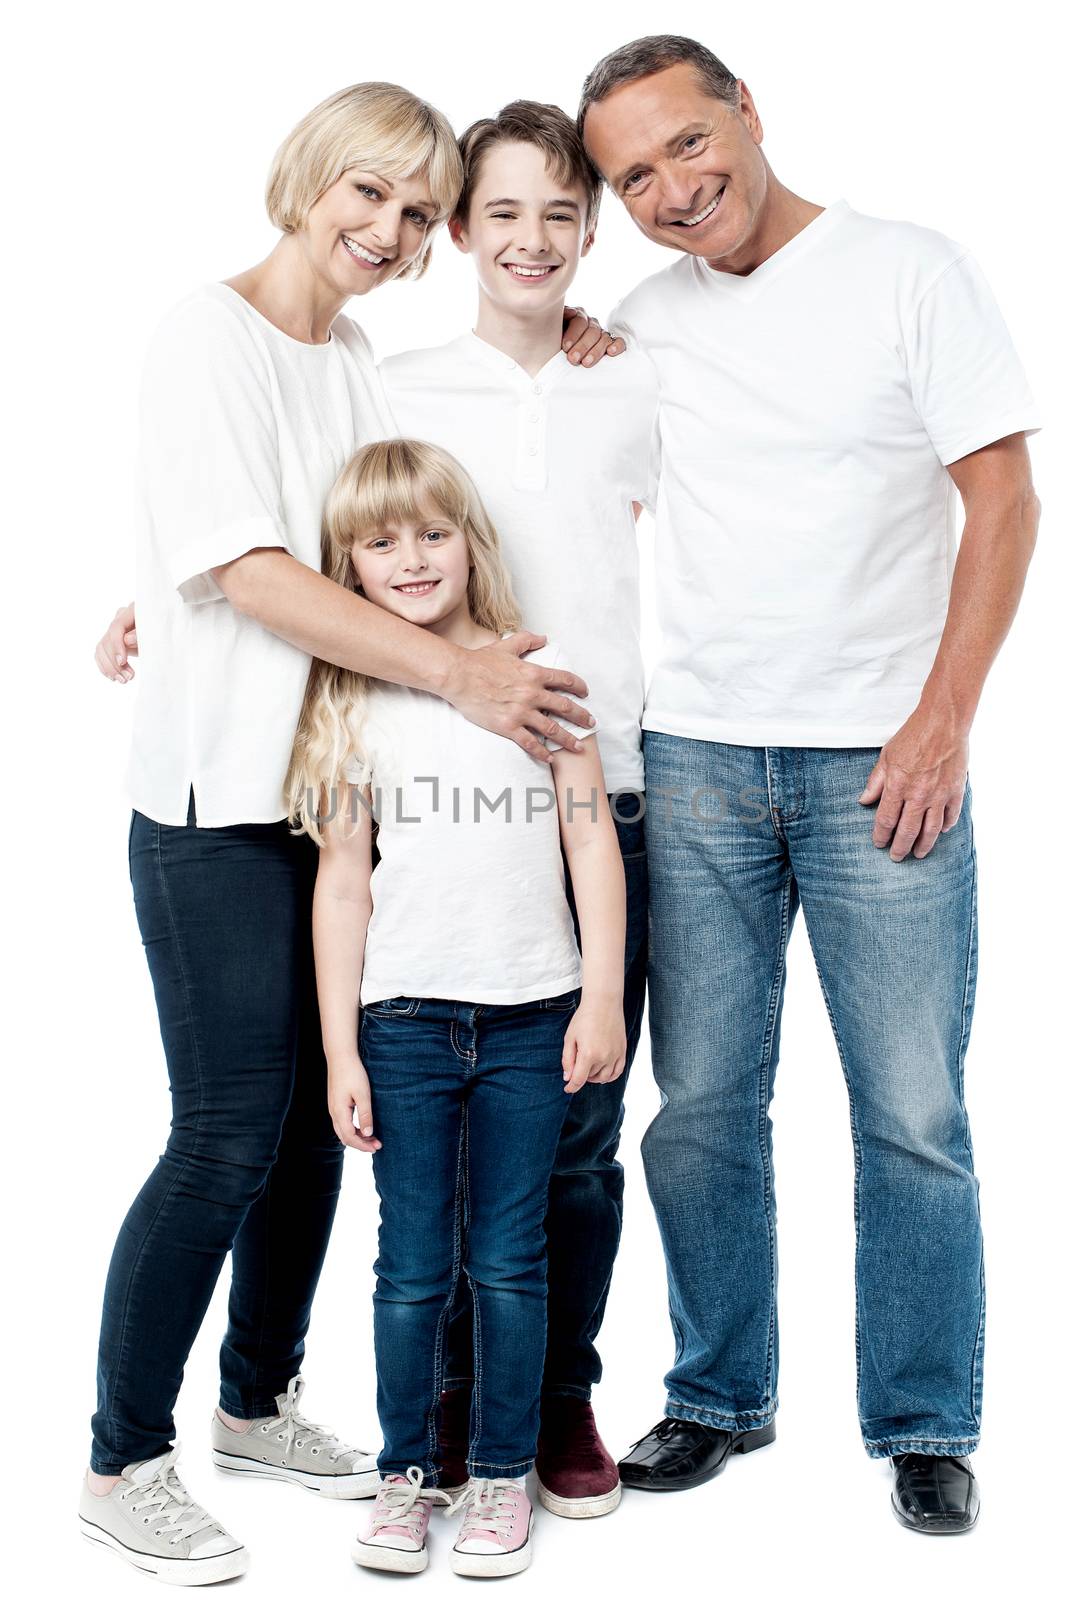 Smiling parents with their children standing together